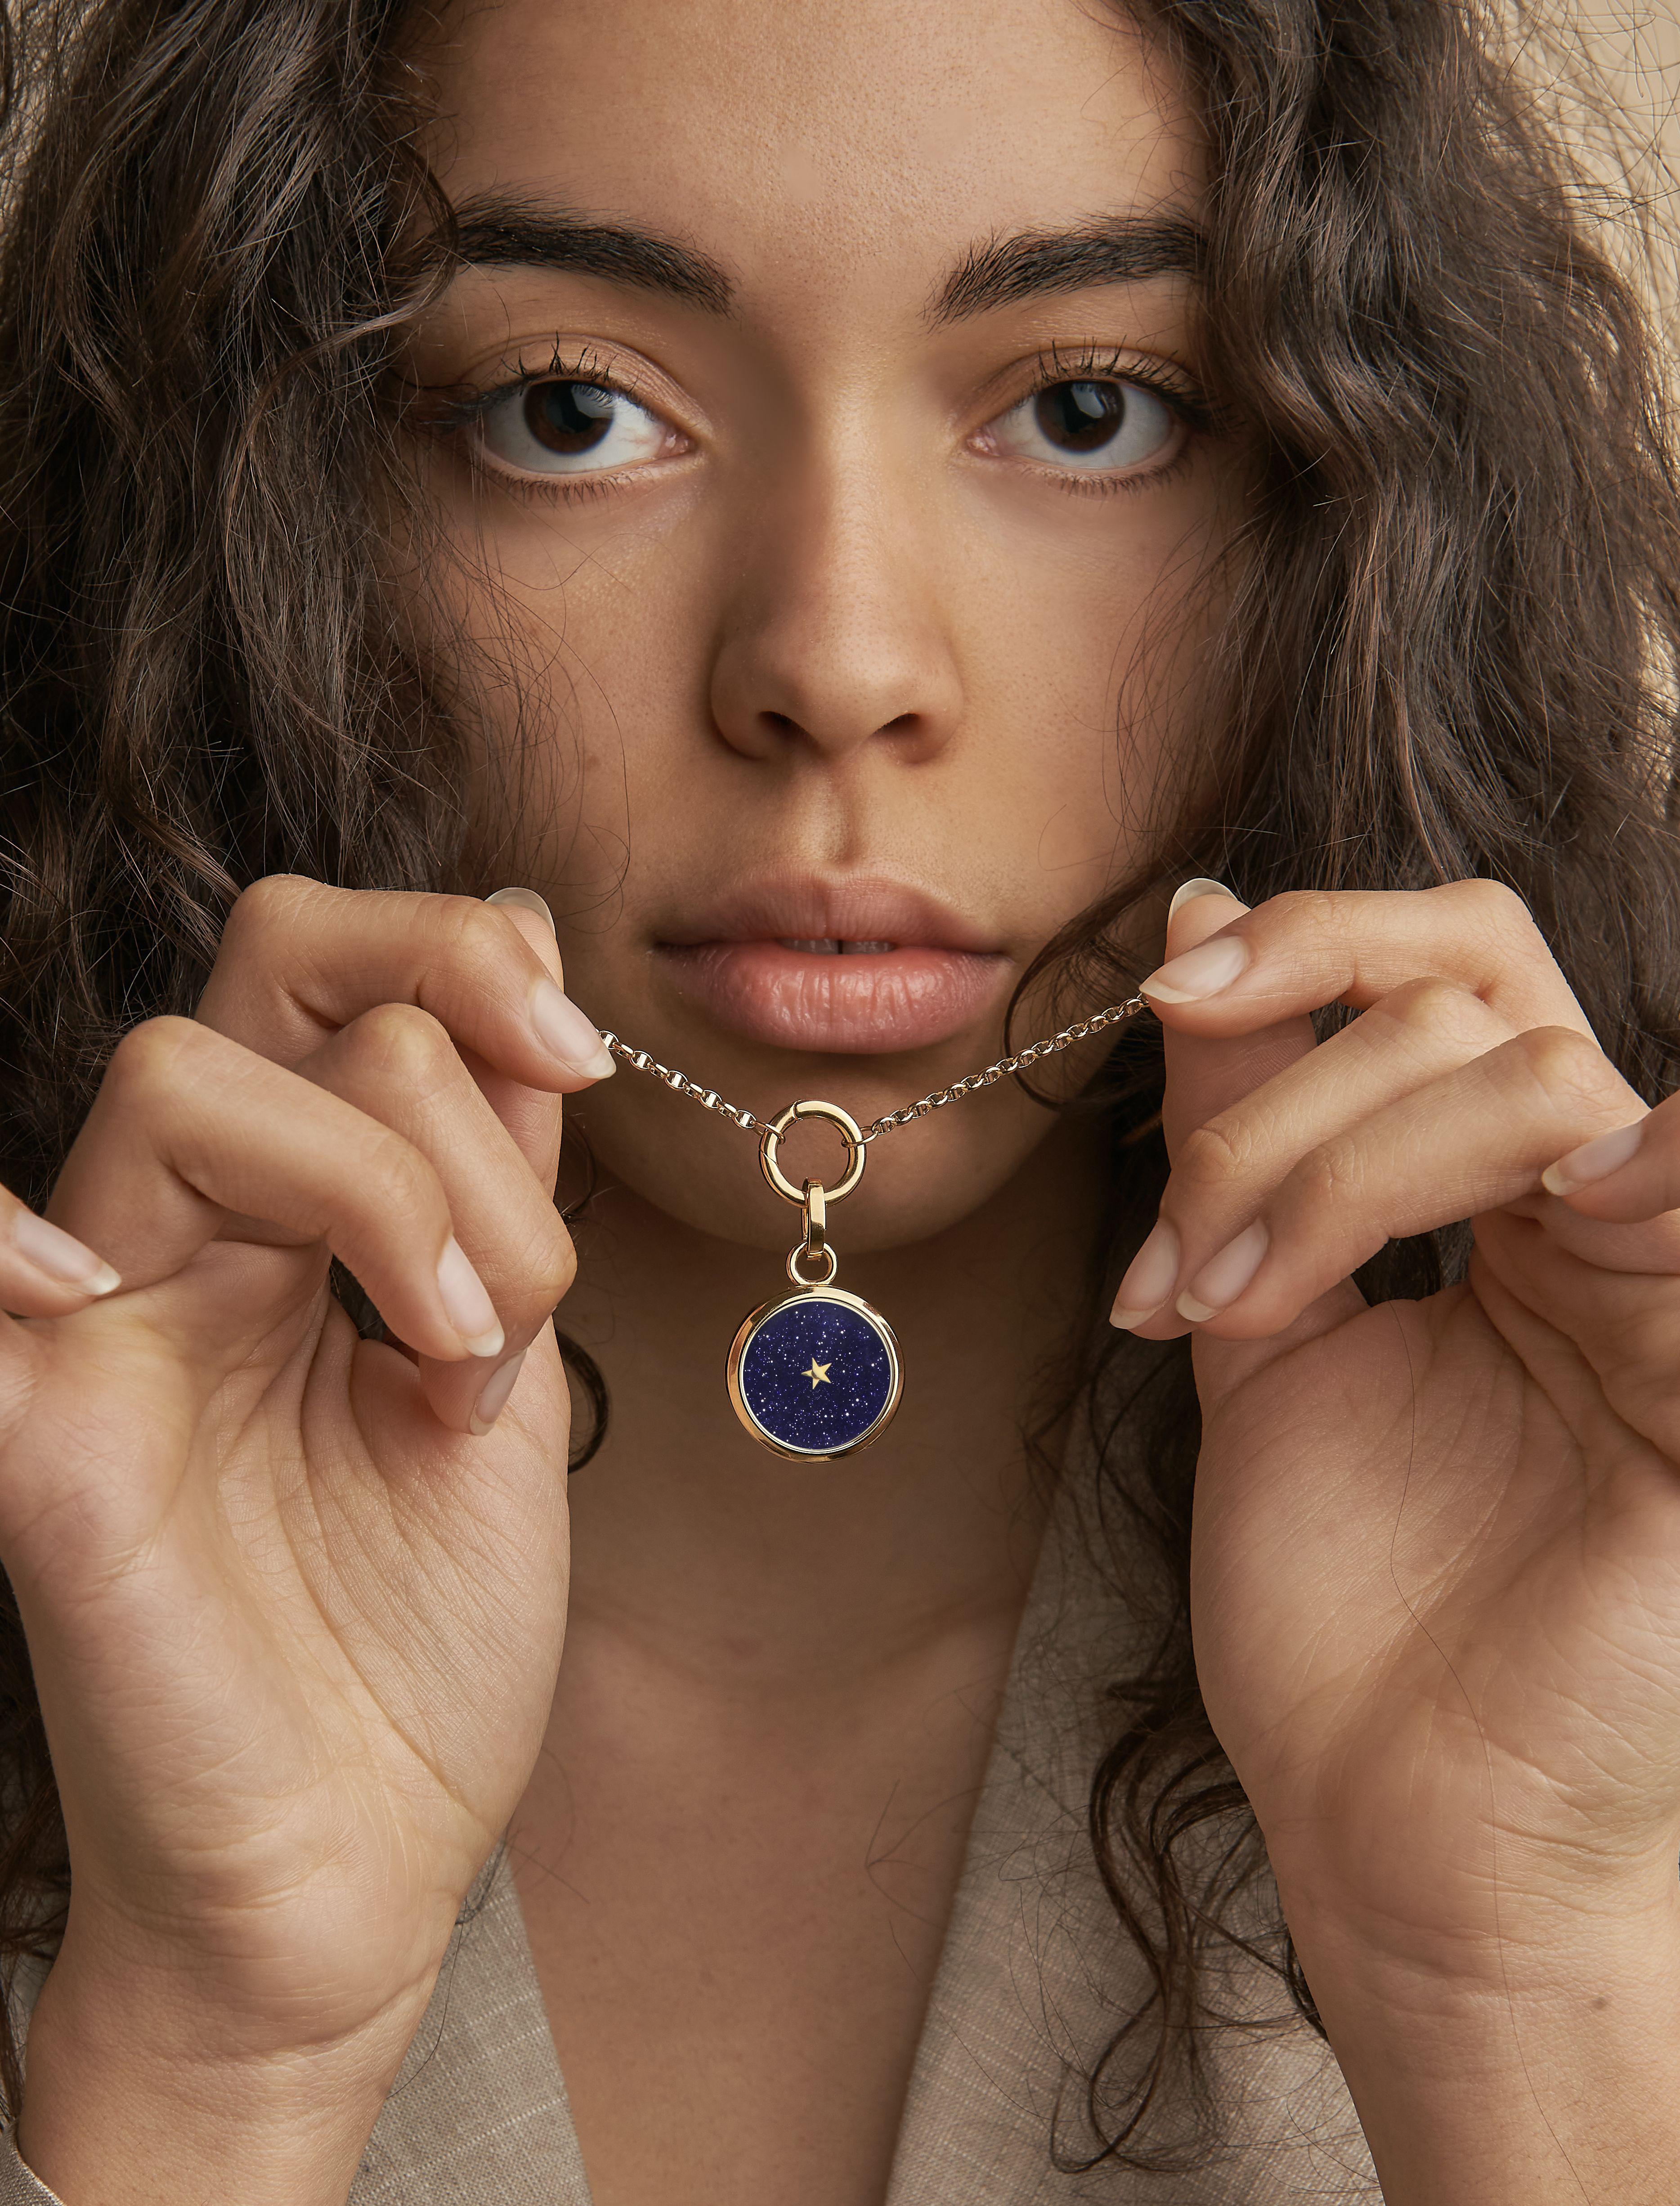 Carpe Diem Midnight Sky Pendant  is non-time-telling timepiece, essentially Blue Aventurine Glass face.
Beautiful Pendant with a movement inside that allows the little star in the middle to move every second to remind that time is precious ! 
The